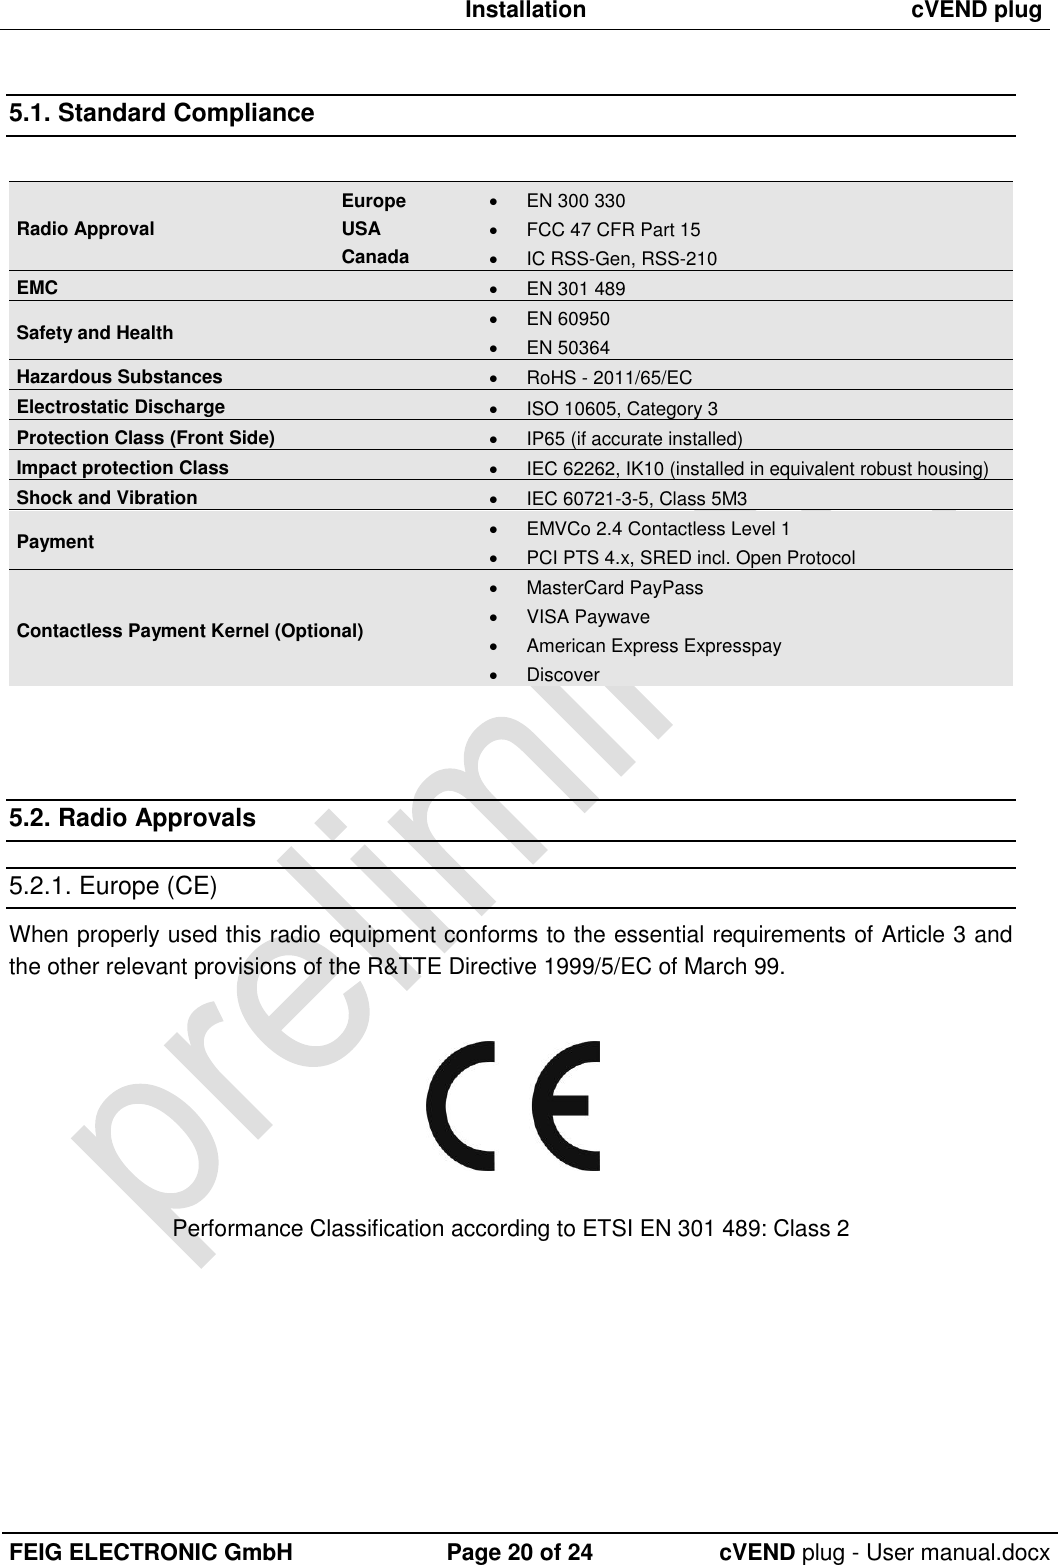  Installation cVEND plug  FEIG ELECTRONIC GmbH Page 20 of 24 cVEND plug - User manual.docx  5.1. Standard Compliance  Radio Approval Europe USA Canada   EN 300 330   FCC 47 CFR Part 15   IC RSS-Gen, RSS-210  EMC   EN 301 489 Safety and Health   EN 60950    EN 50364 Hazardous Substances   RoHS - 2011/65/EC Electrostatic Discharge   ISO 10605, Category 3 Protection Class (Front Side)   IP65 (if accurate installed) Impact protection Class   IEC 62262, IK10 (installed in equivalent robust housing) Shock and Vibration    IEC 60721-3-5, Class 5M3 Payment   EMVCo 2.4 Contactless Level 1   PCI PTS 4.x, SRED incl. Open Protocol  Contactless Payment Kernel (Optional)   MasterCard PayPass   VISA Paywave   American Express Expresspay   Discover    5.2. Radio Approvals 5.2.1. Europe (CE) When properly used this radio equipment conforms to the essential requirements of Article 3 and the other relevant provisions of the R&amp;TTE Directive 1999/5/EC of March 99.    Performance Classification according to ETSI EN 301 489: Class 2  